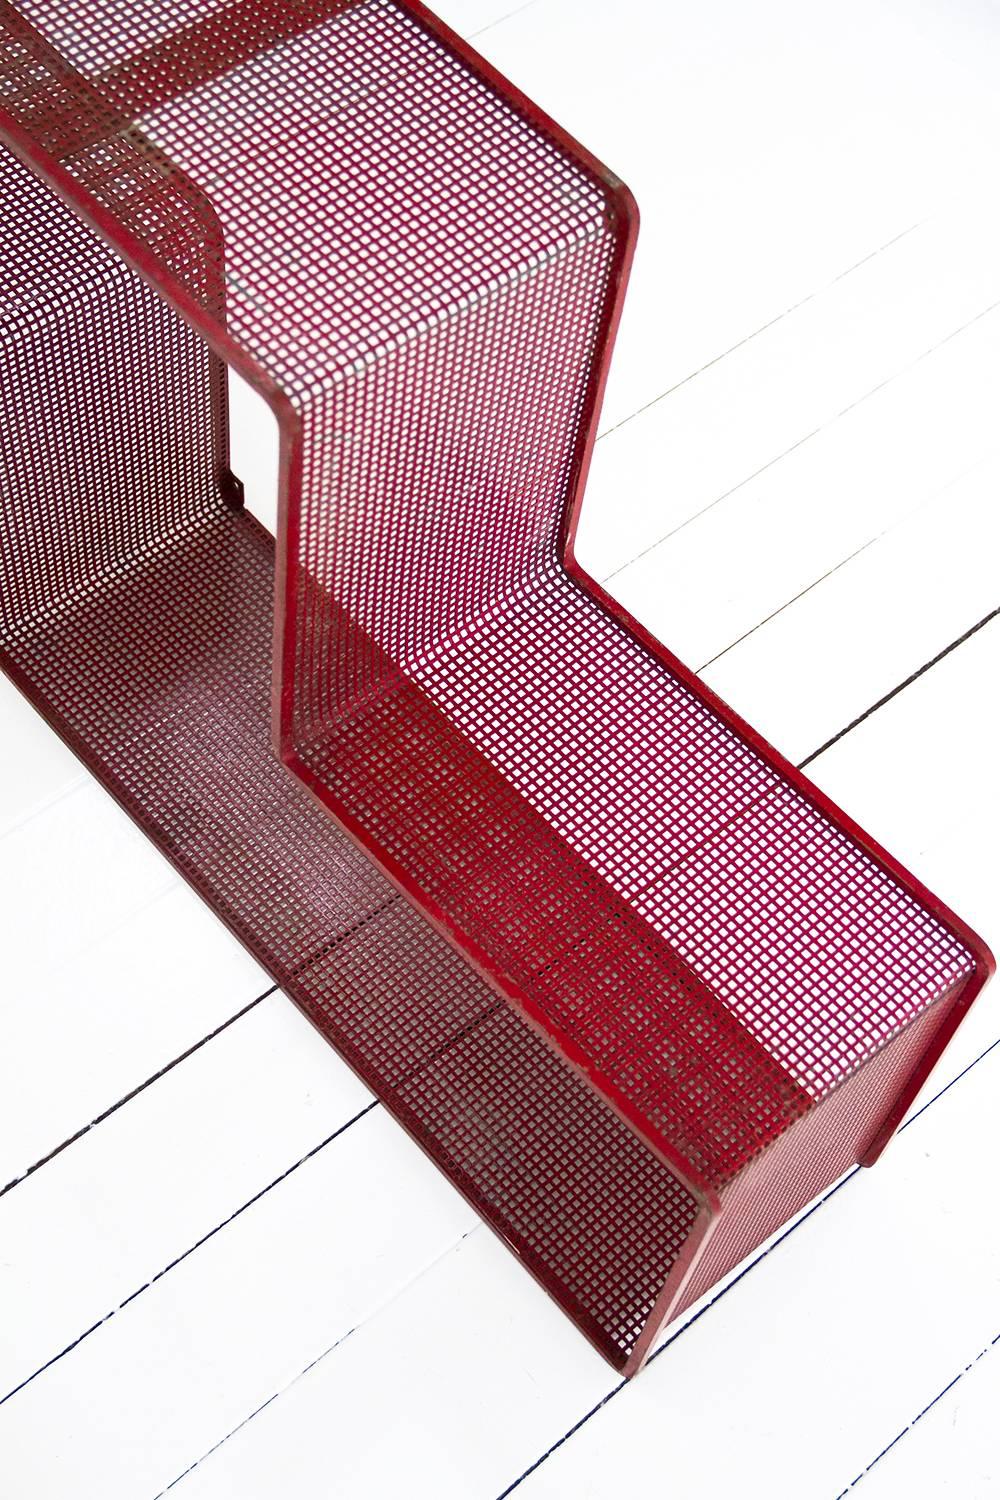 Red Dedal Wall Shelf by Mathieu Matégot, Perforated Steel, circa 1950, France In Good Condition For Sale In Barcelona, ES